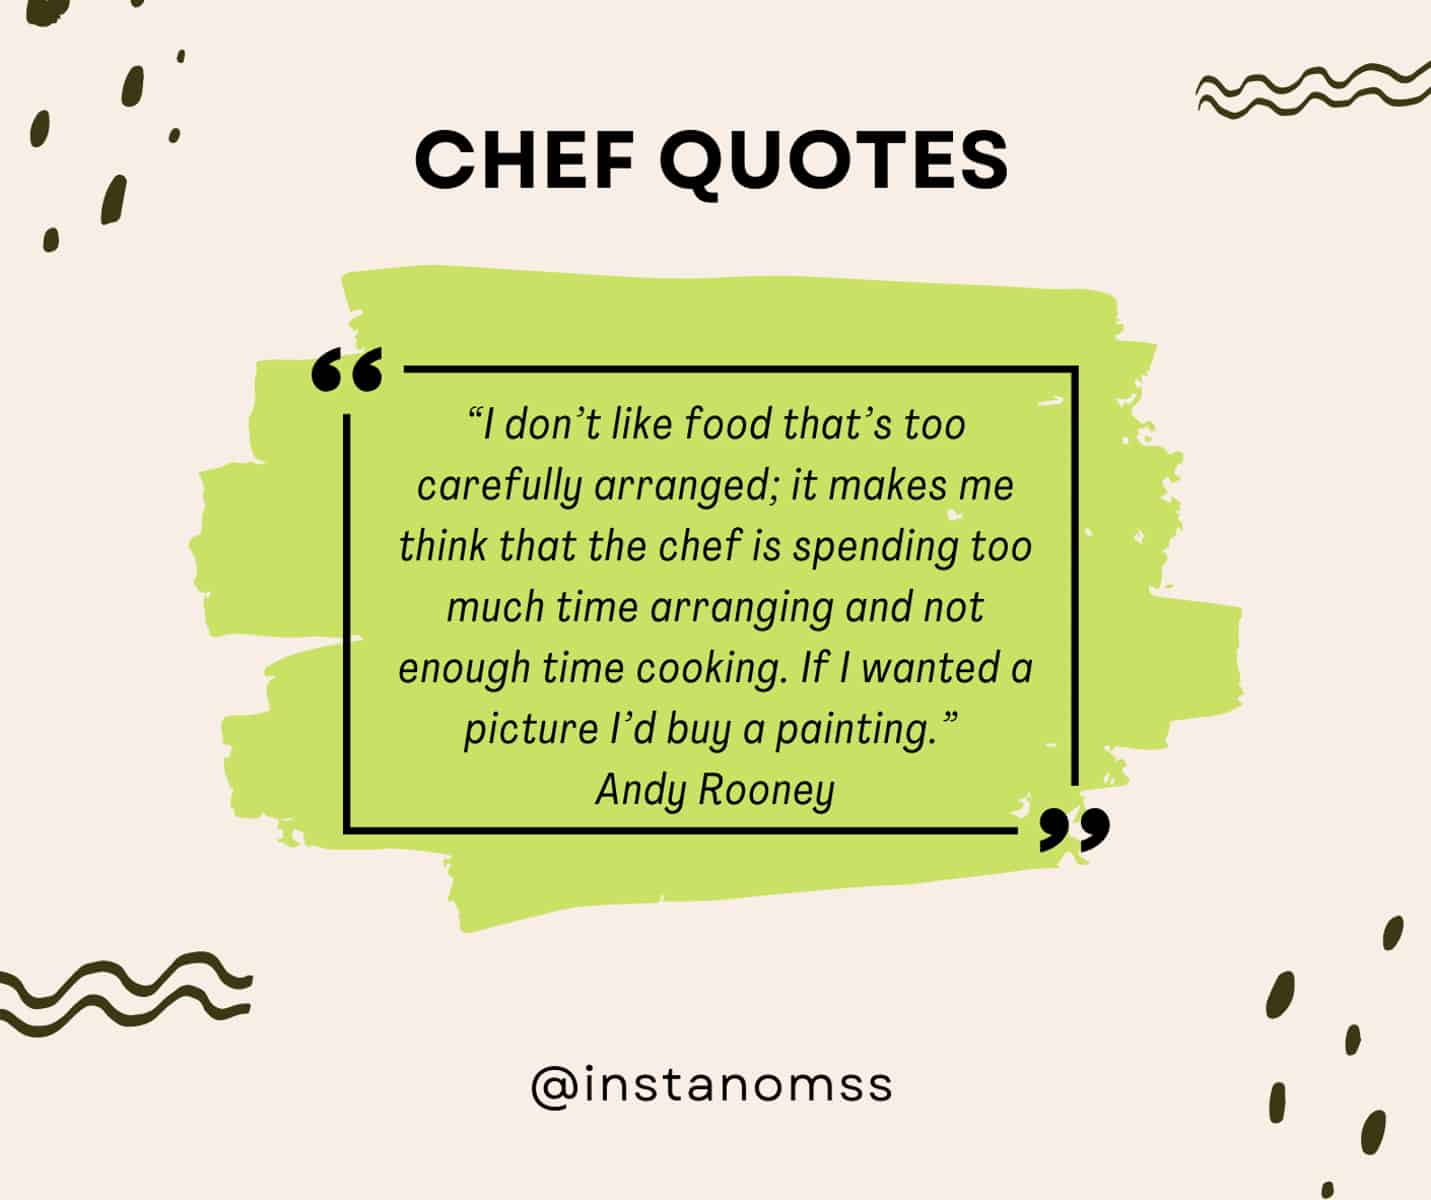 “I don’t like food that’s too carefully arranged; it makes me think that the chef is spending too much time arranging and not enough time cooking. If I wanted a picture I’d buy a painting.” Andy Rooney